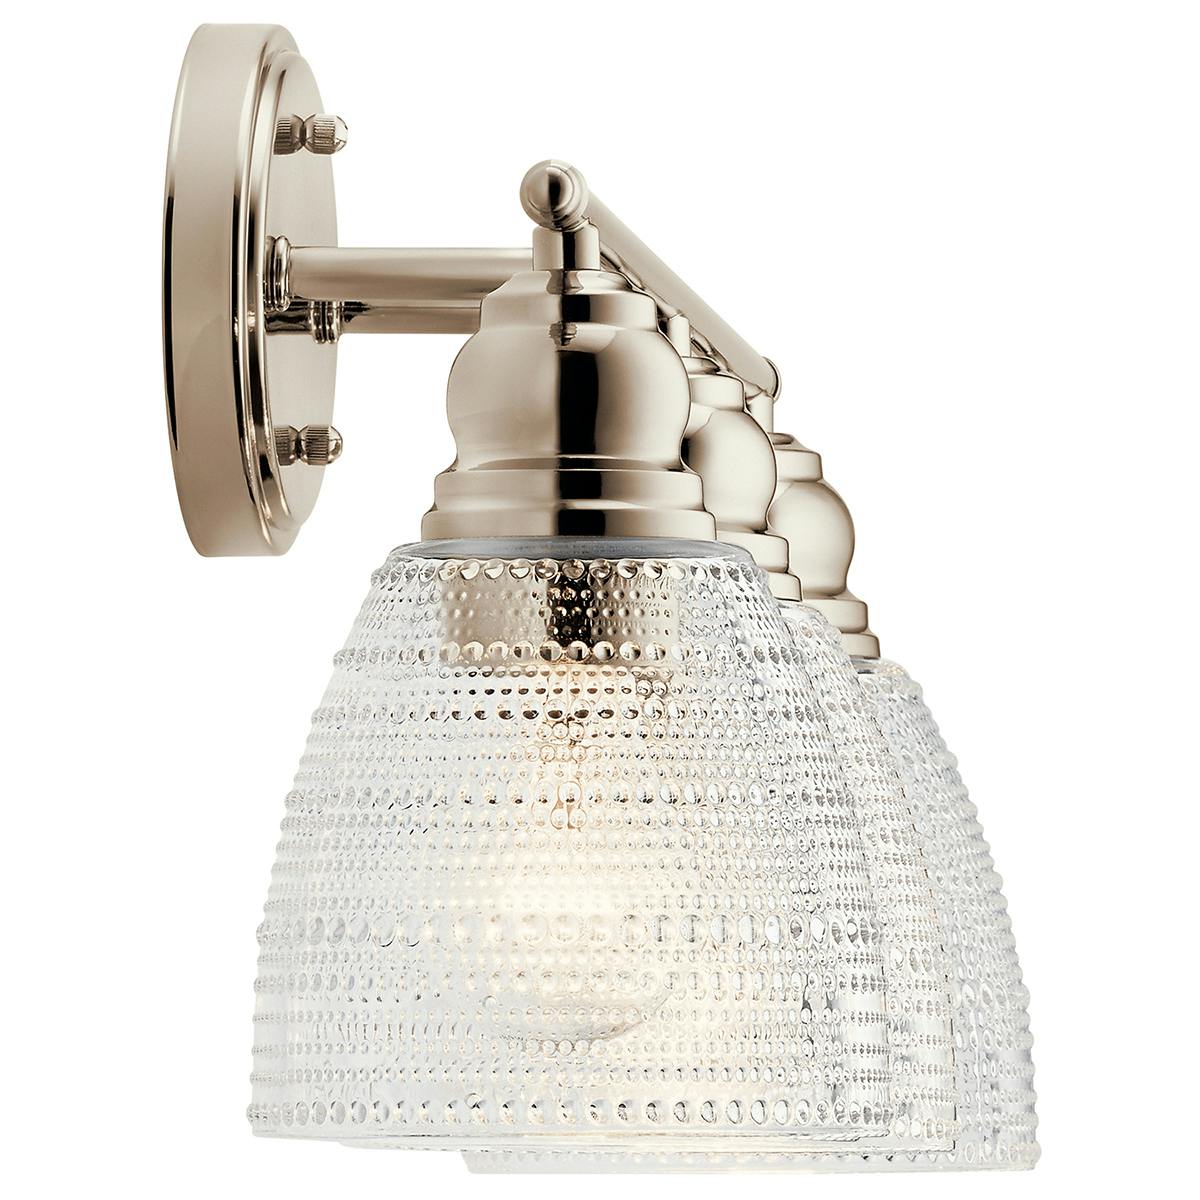 Profile view of the Karmarie 3 Light Vanity Light Nickel on a white background